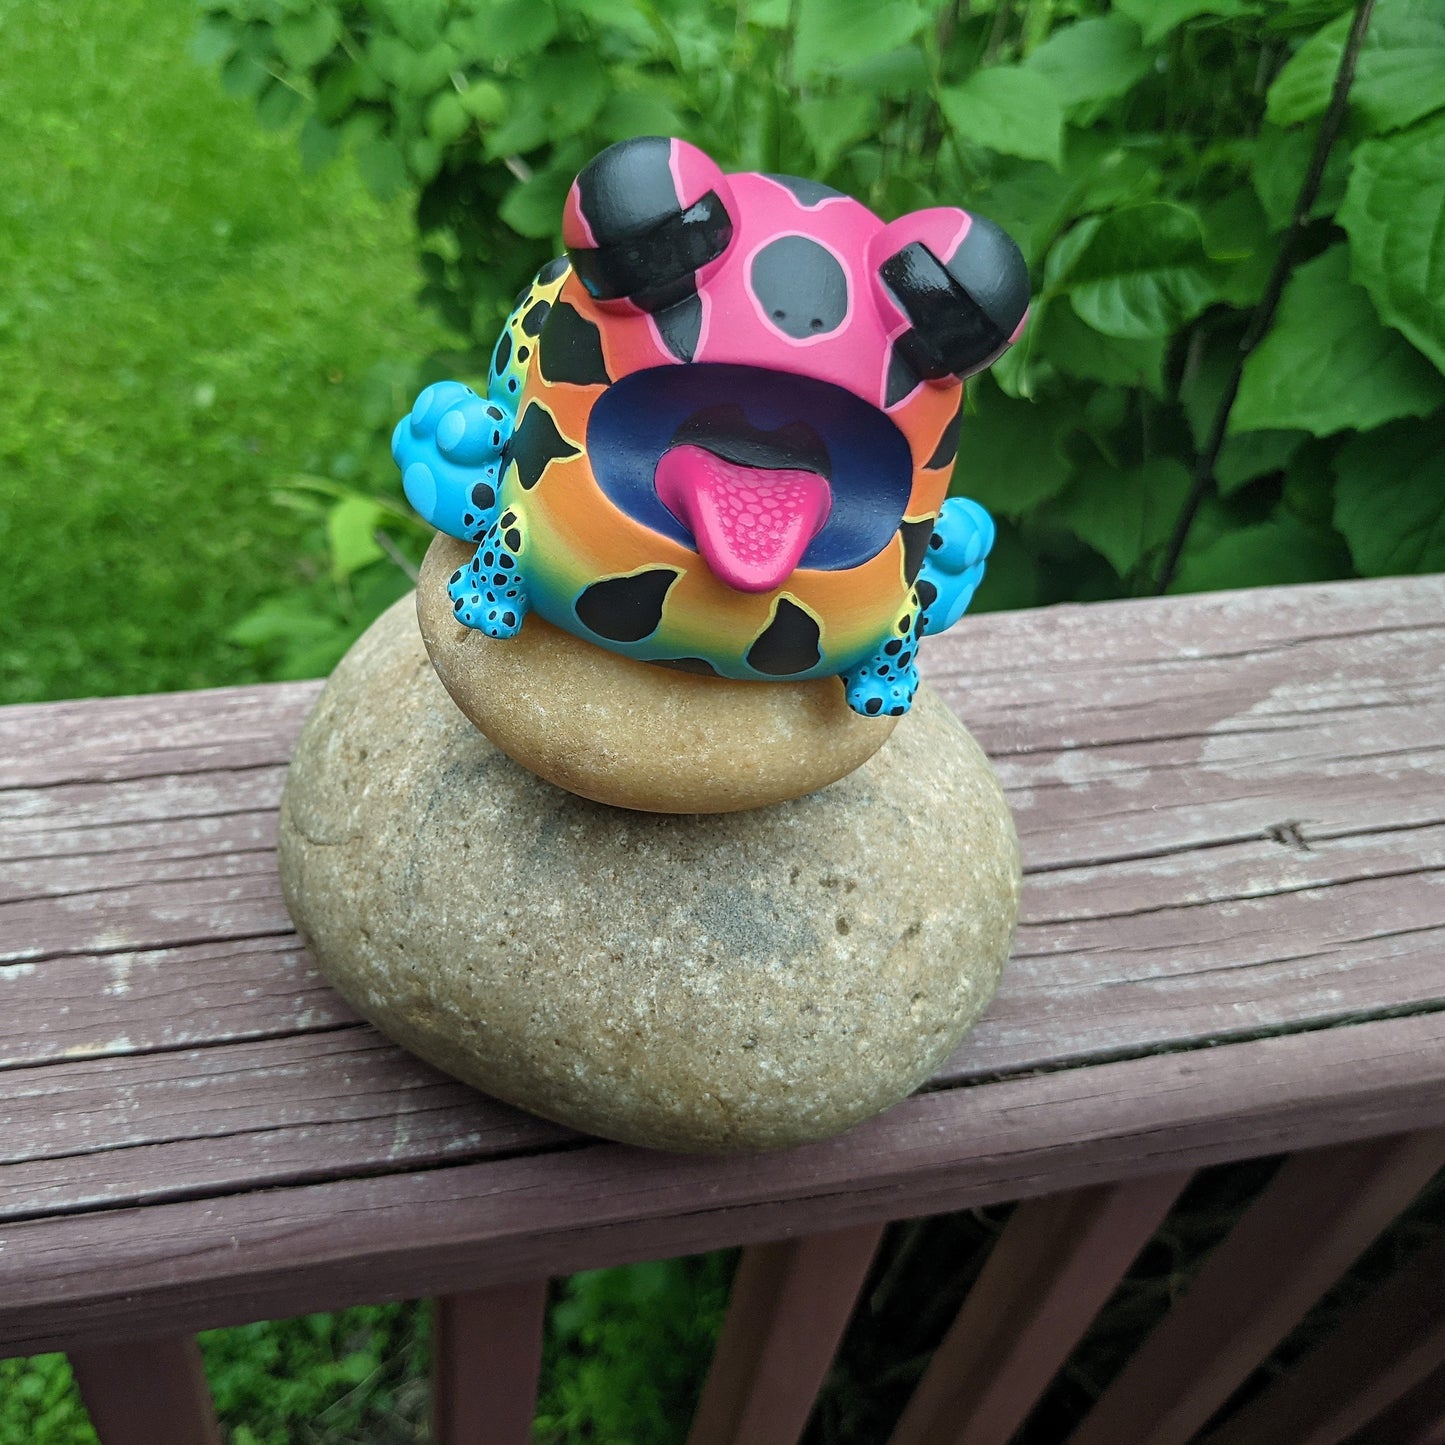 SUNS OUT BUNS OUT Custom 1 of 1 Ributt Vinyl Figure: “Rainbow Poison Dart Toad” by Kendra Thomas